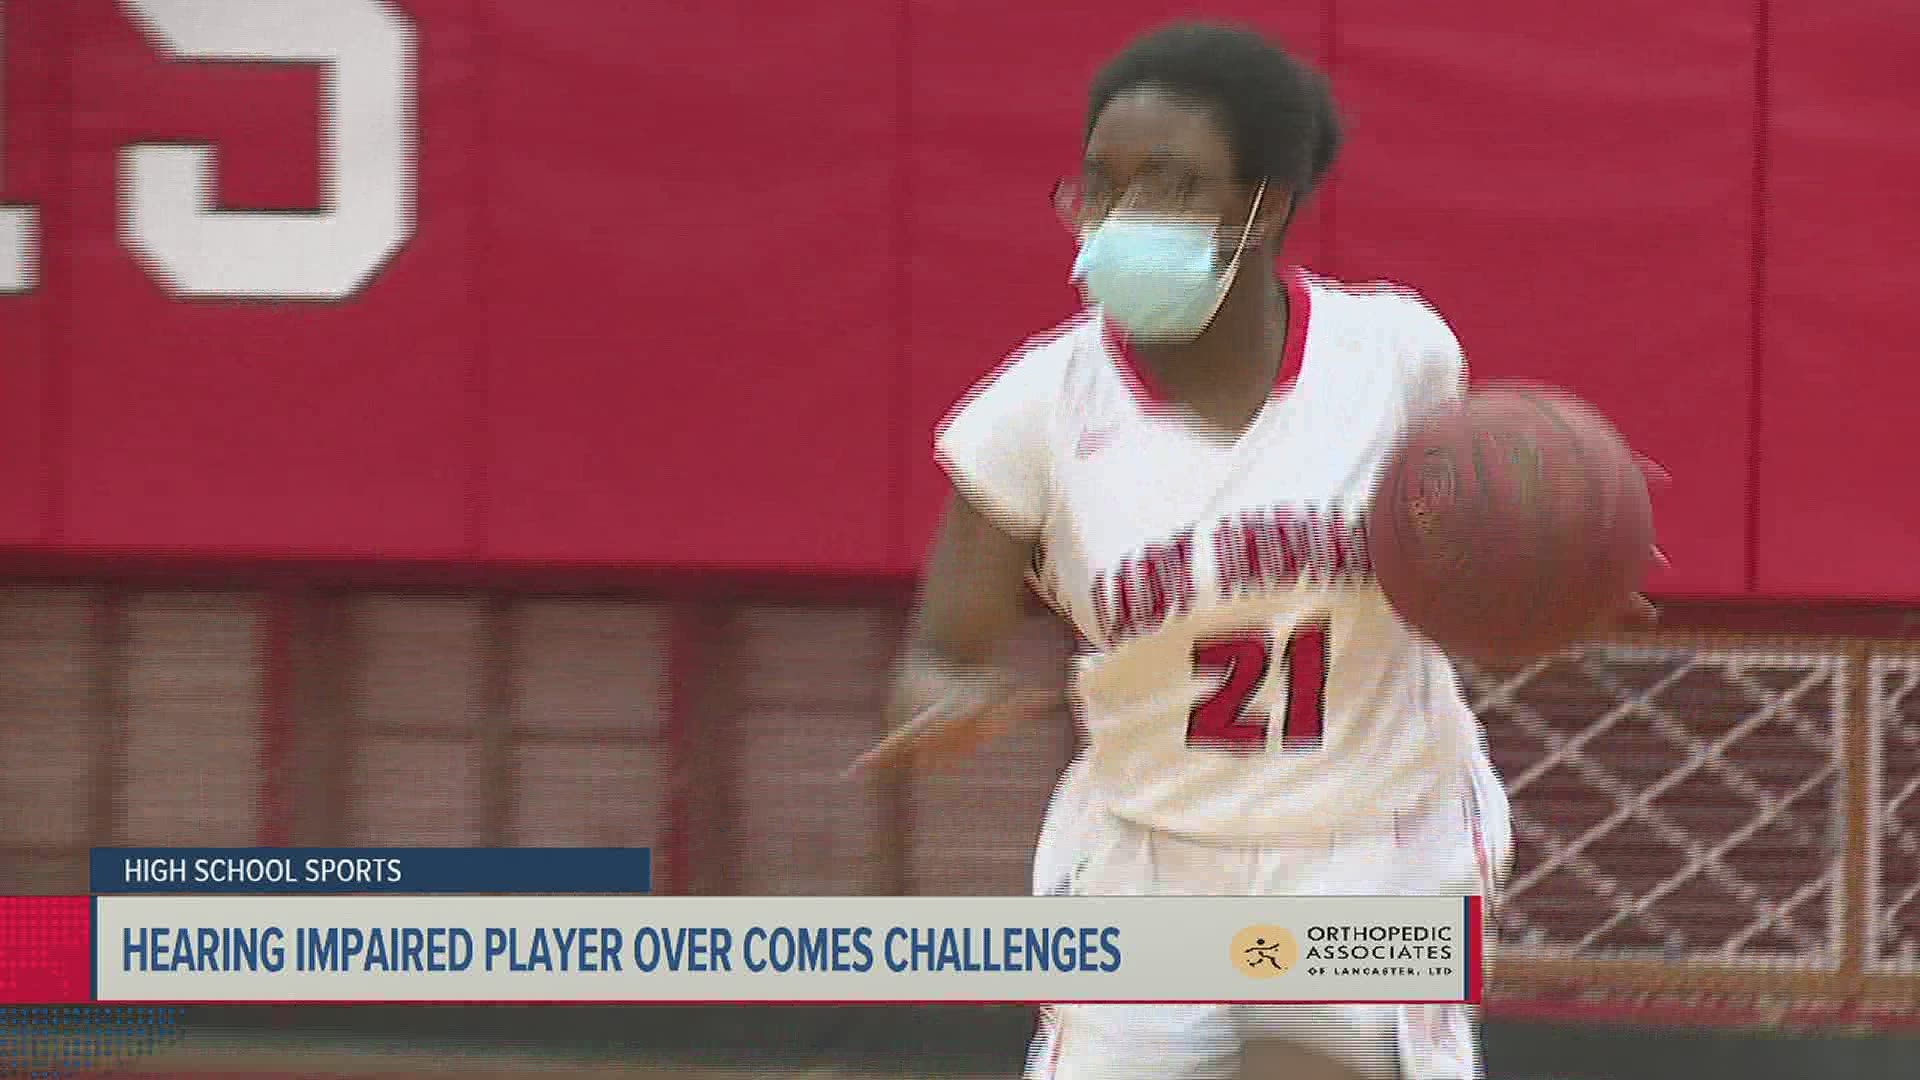 Susquehanna Township's Stephanie Shipi took on the challenge of playing basketball when she was in 7th grade.